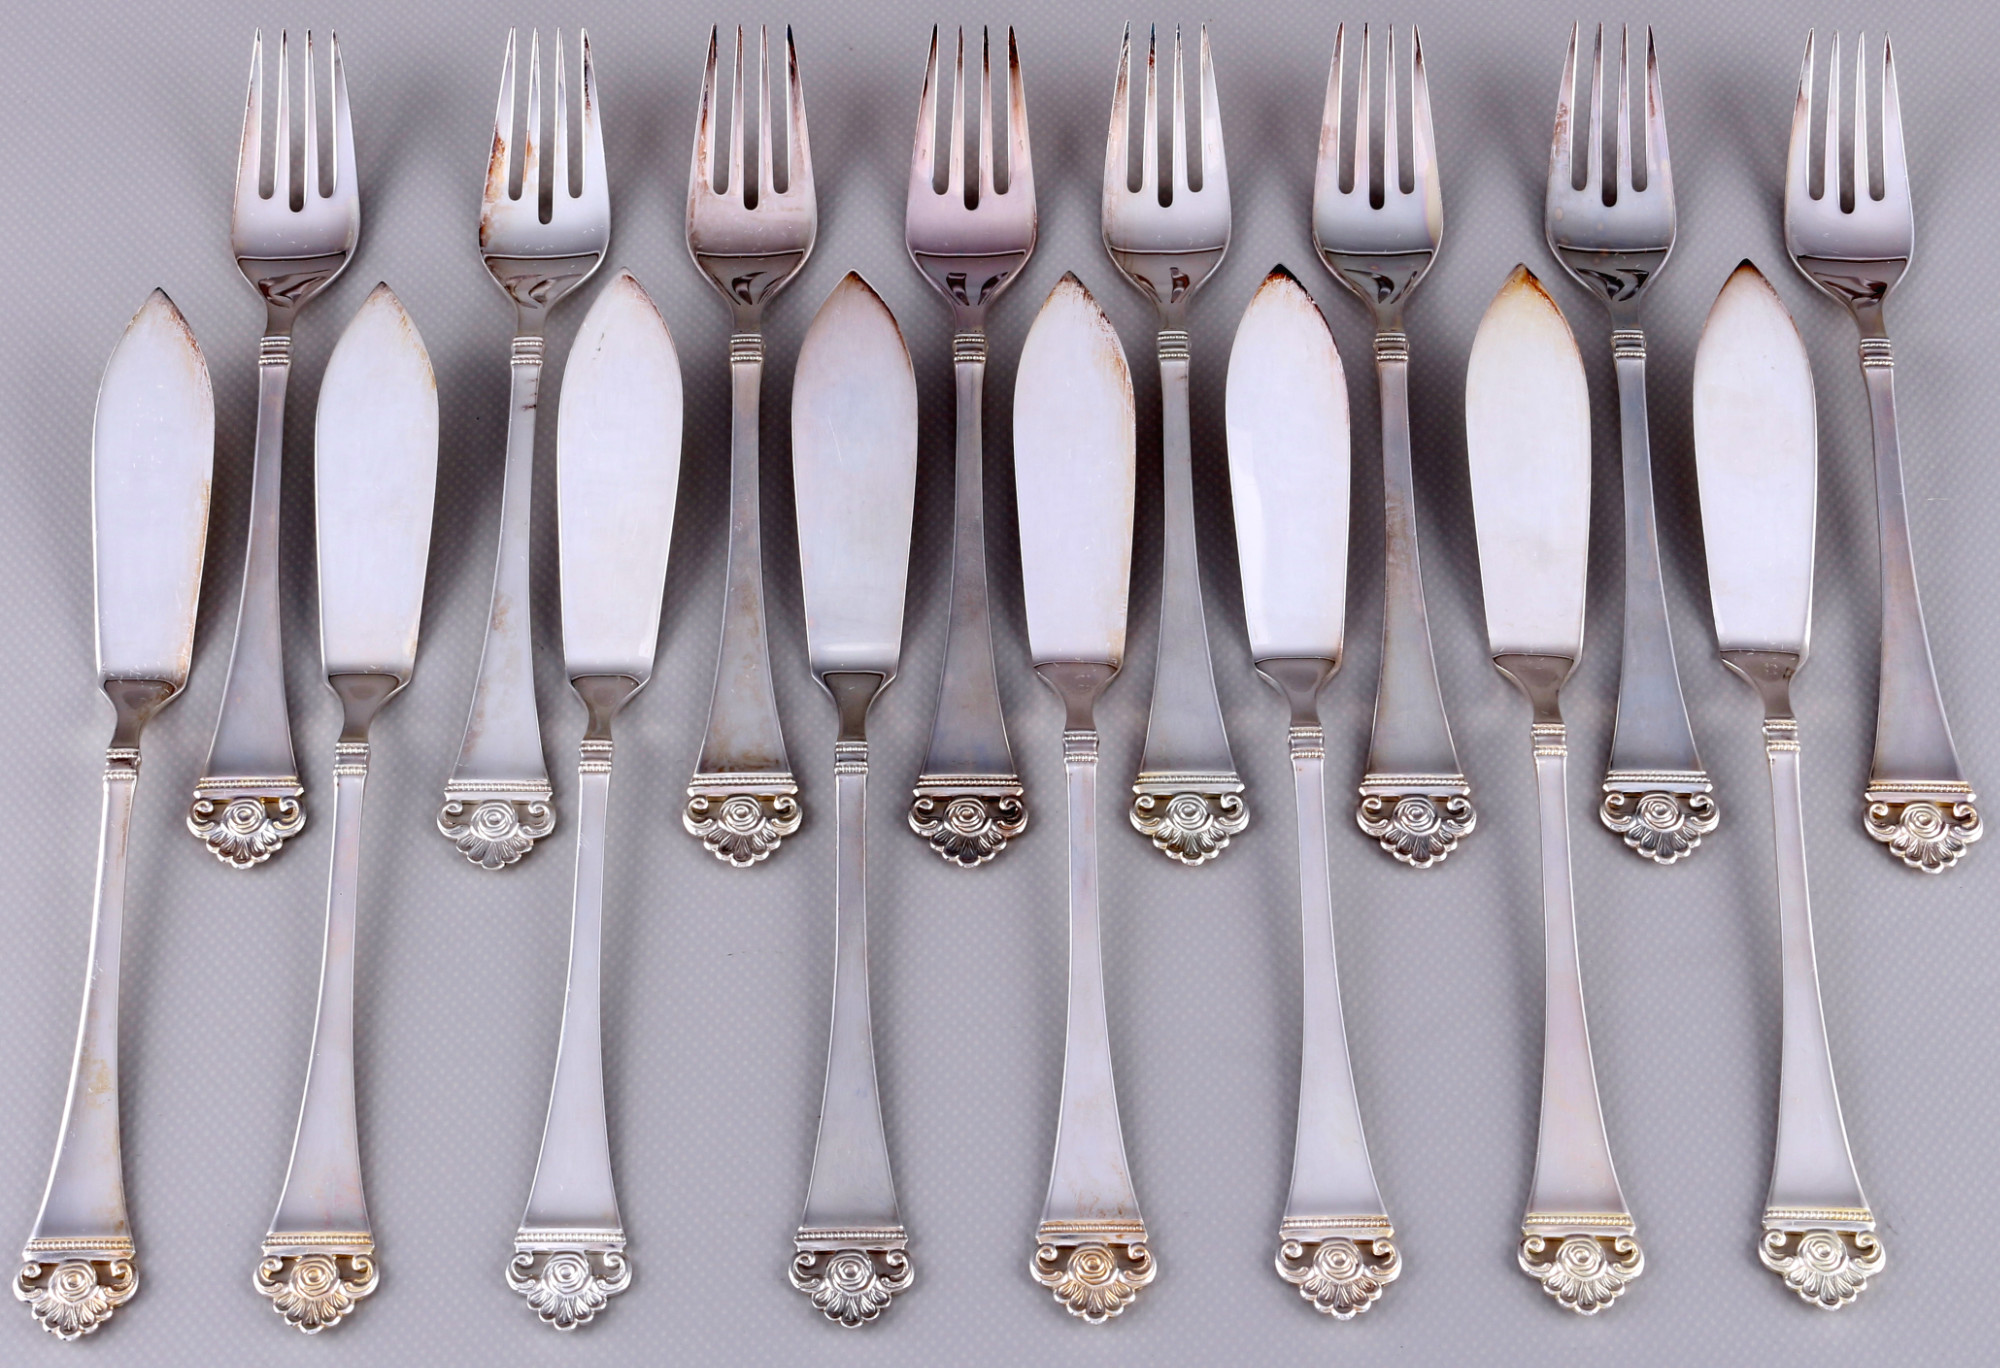 Robbe and Berking Rose Pattern 800 silver fish cutlery for 8 persons, Silber Fischbesteck für 8 Pers